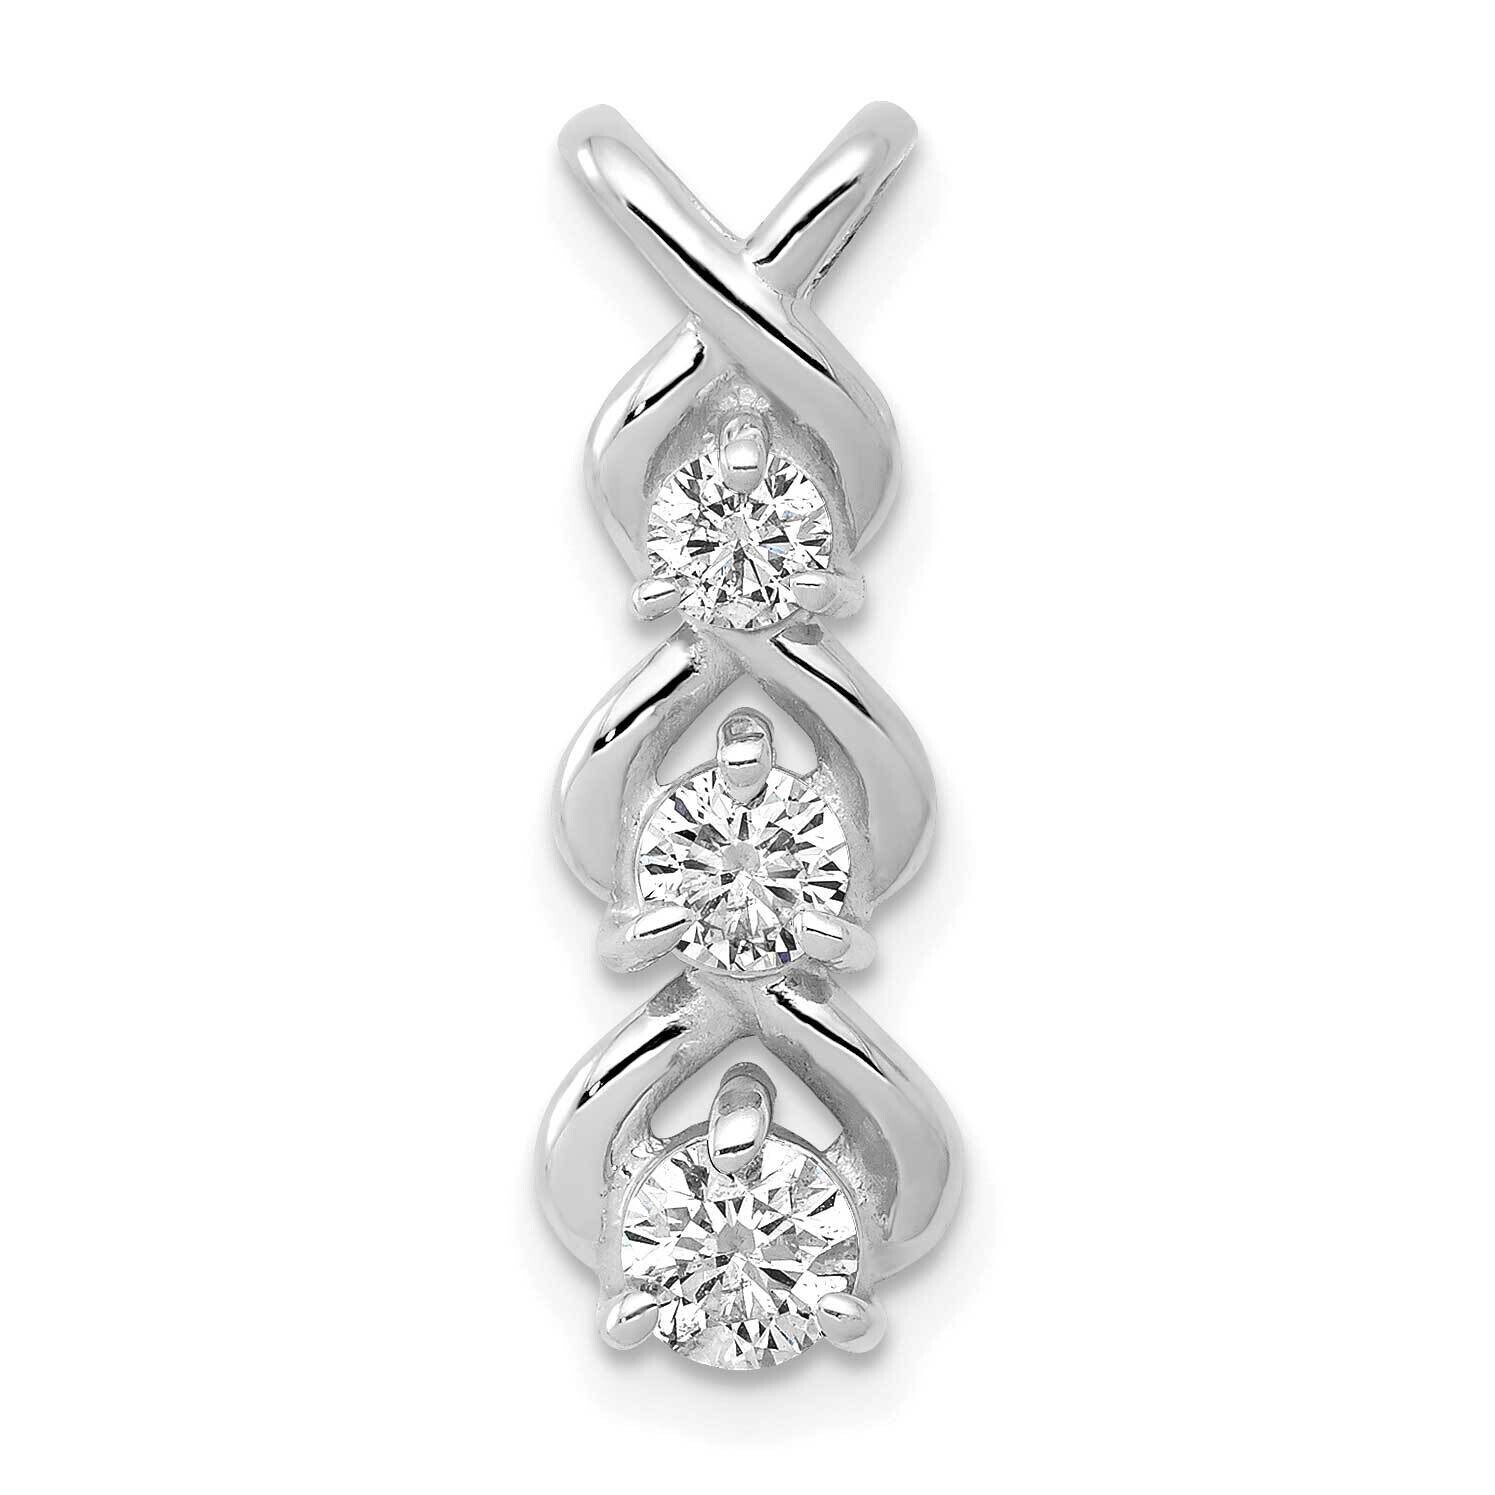 Holds 1-4, 1-3.5, 1-3.3mm Stone, Pendant Mounting 14k White Gold XP683